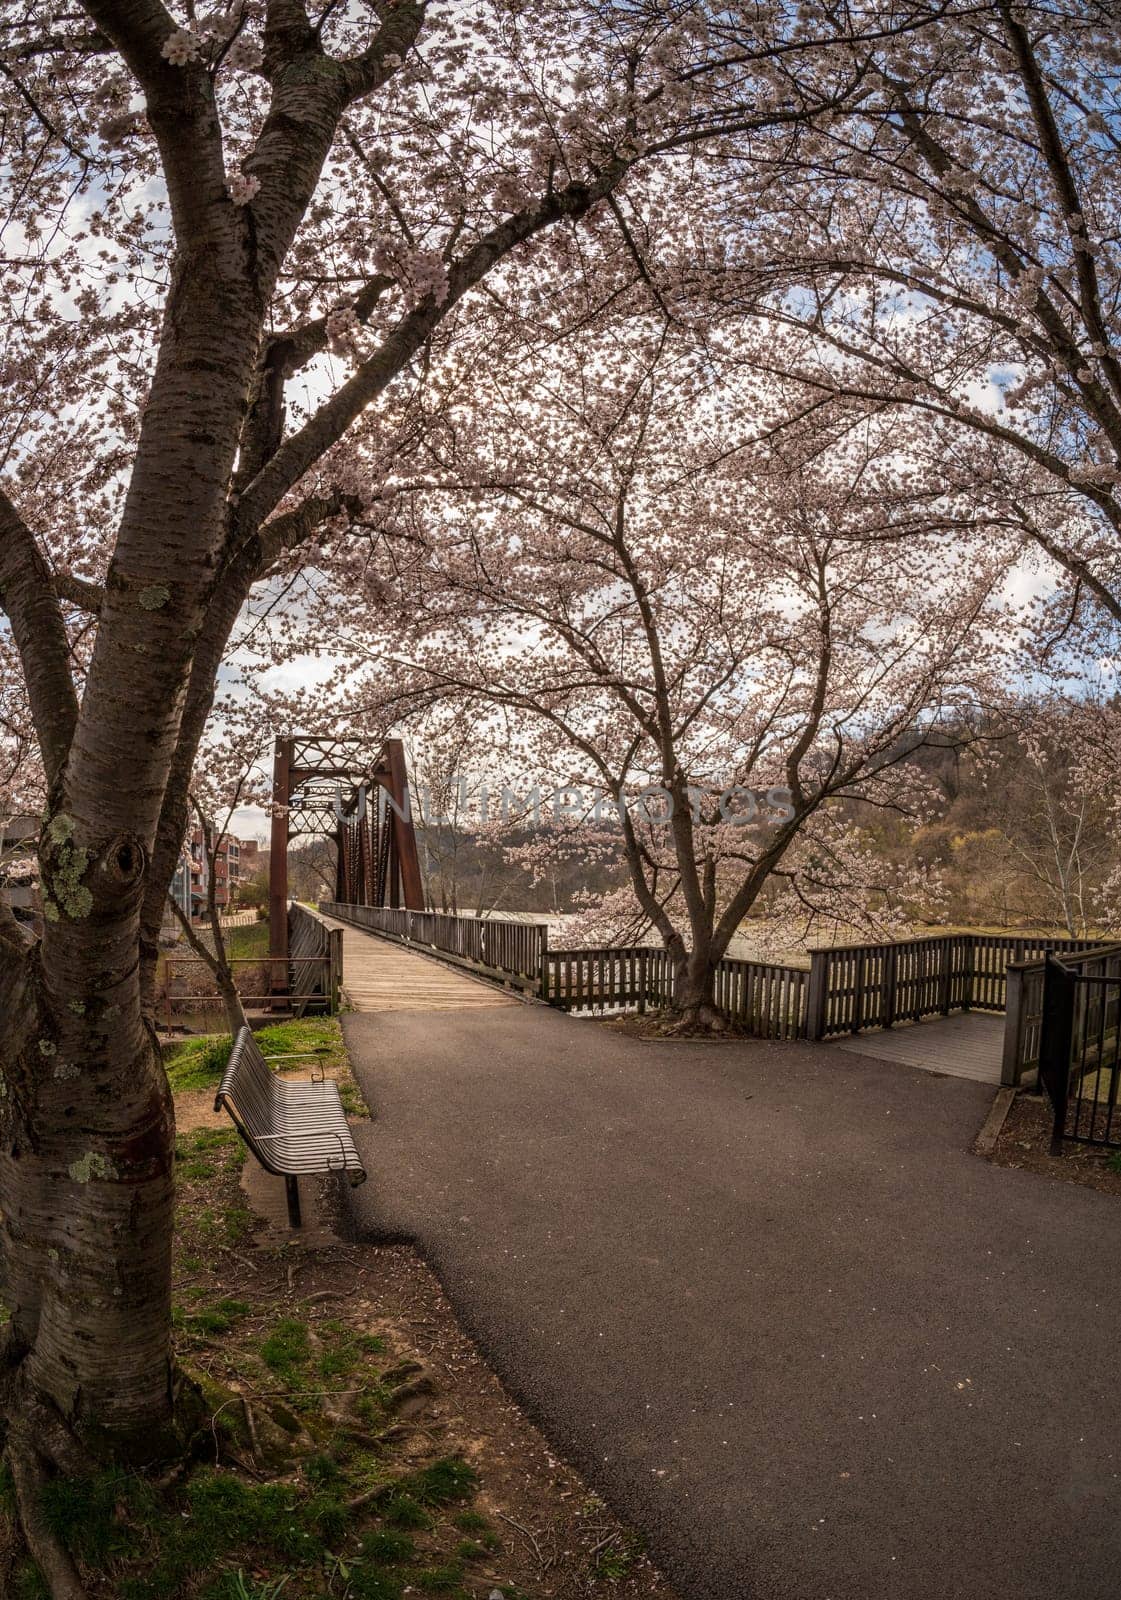 Old steel girder bridge carrying walking and cycling trail in Morgantown WV over Deckers Creek with cherry blossoms blooming in the spring